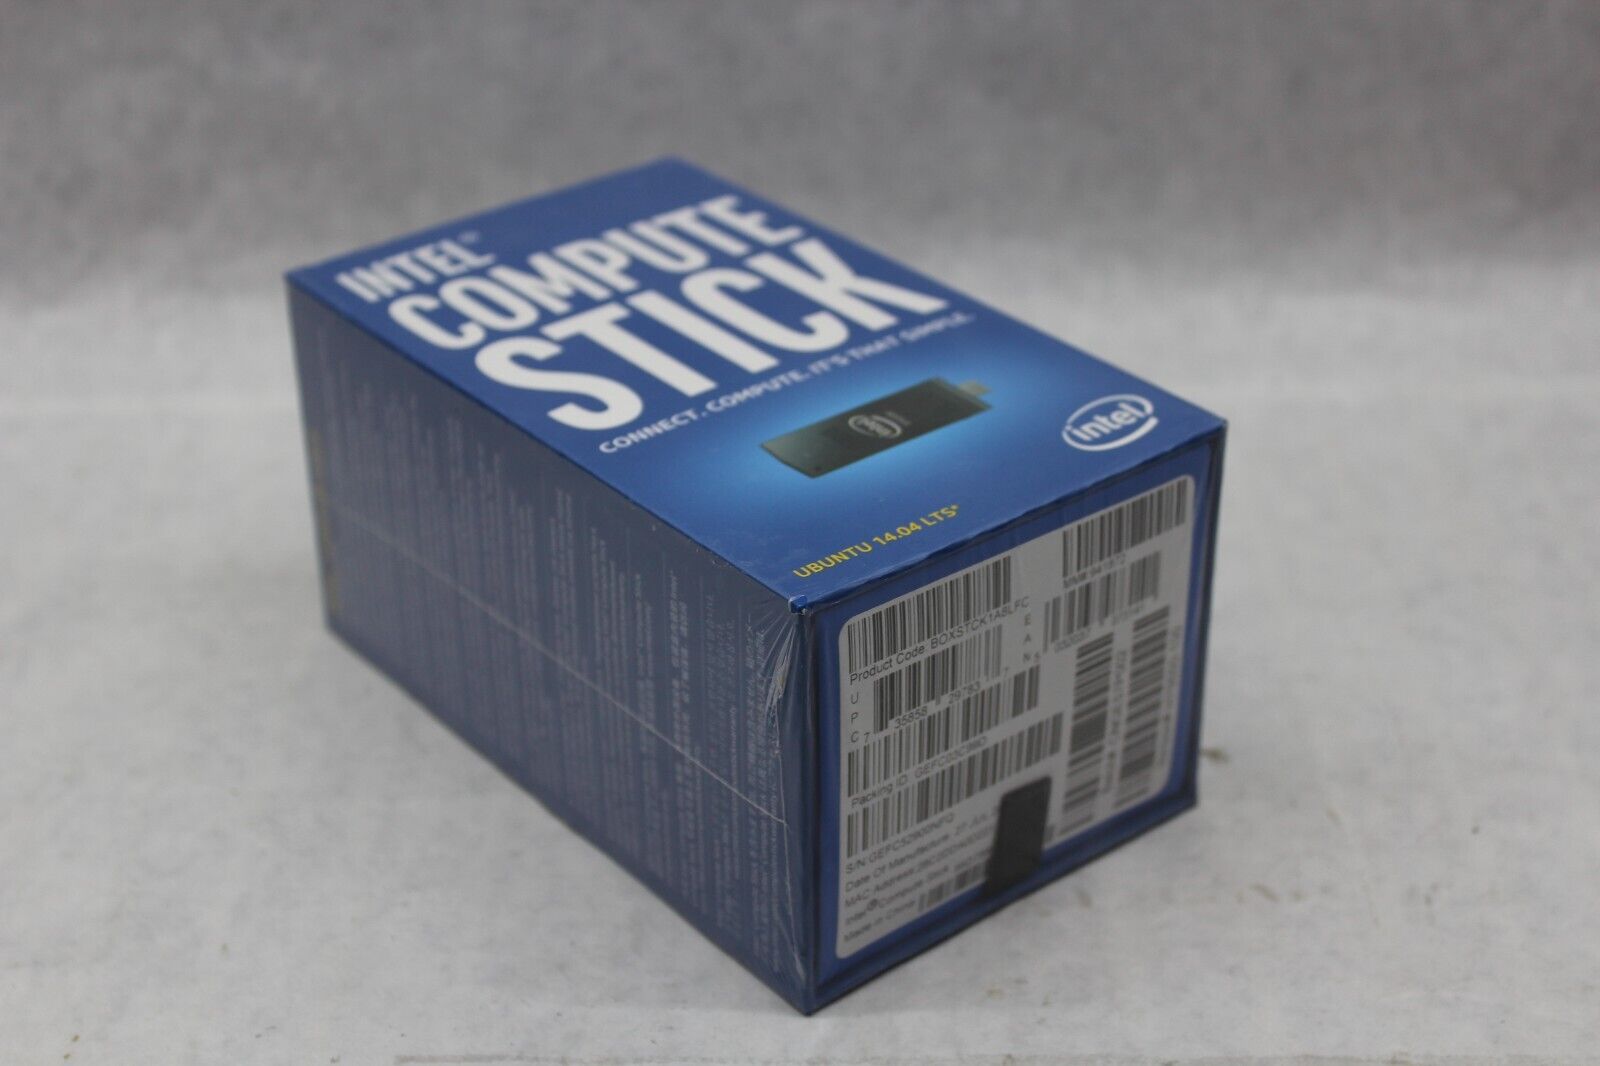 Intel STCK1A8LFC 8GB PC Compute Stick with Linux, New Sealed